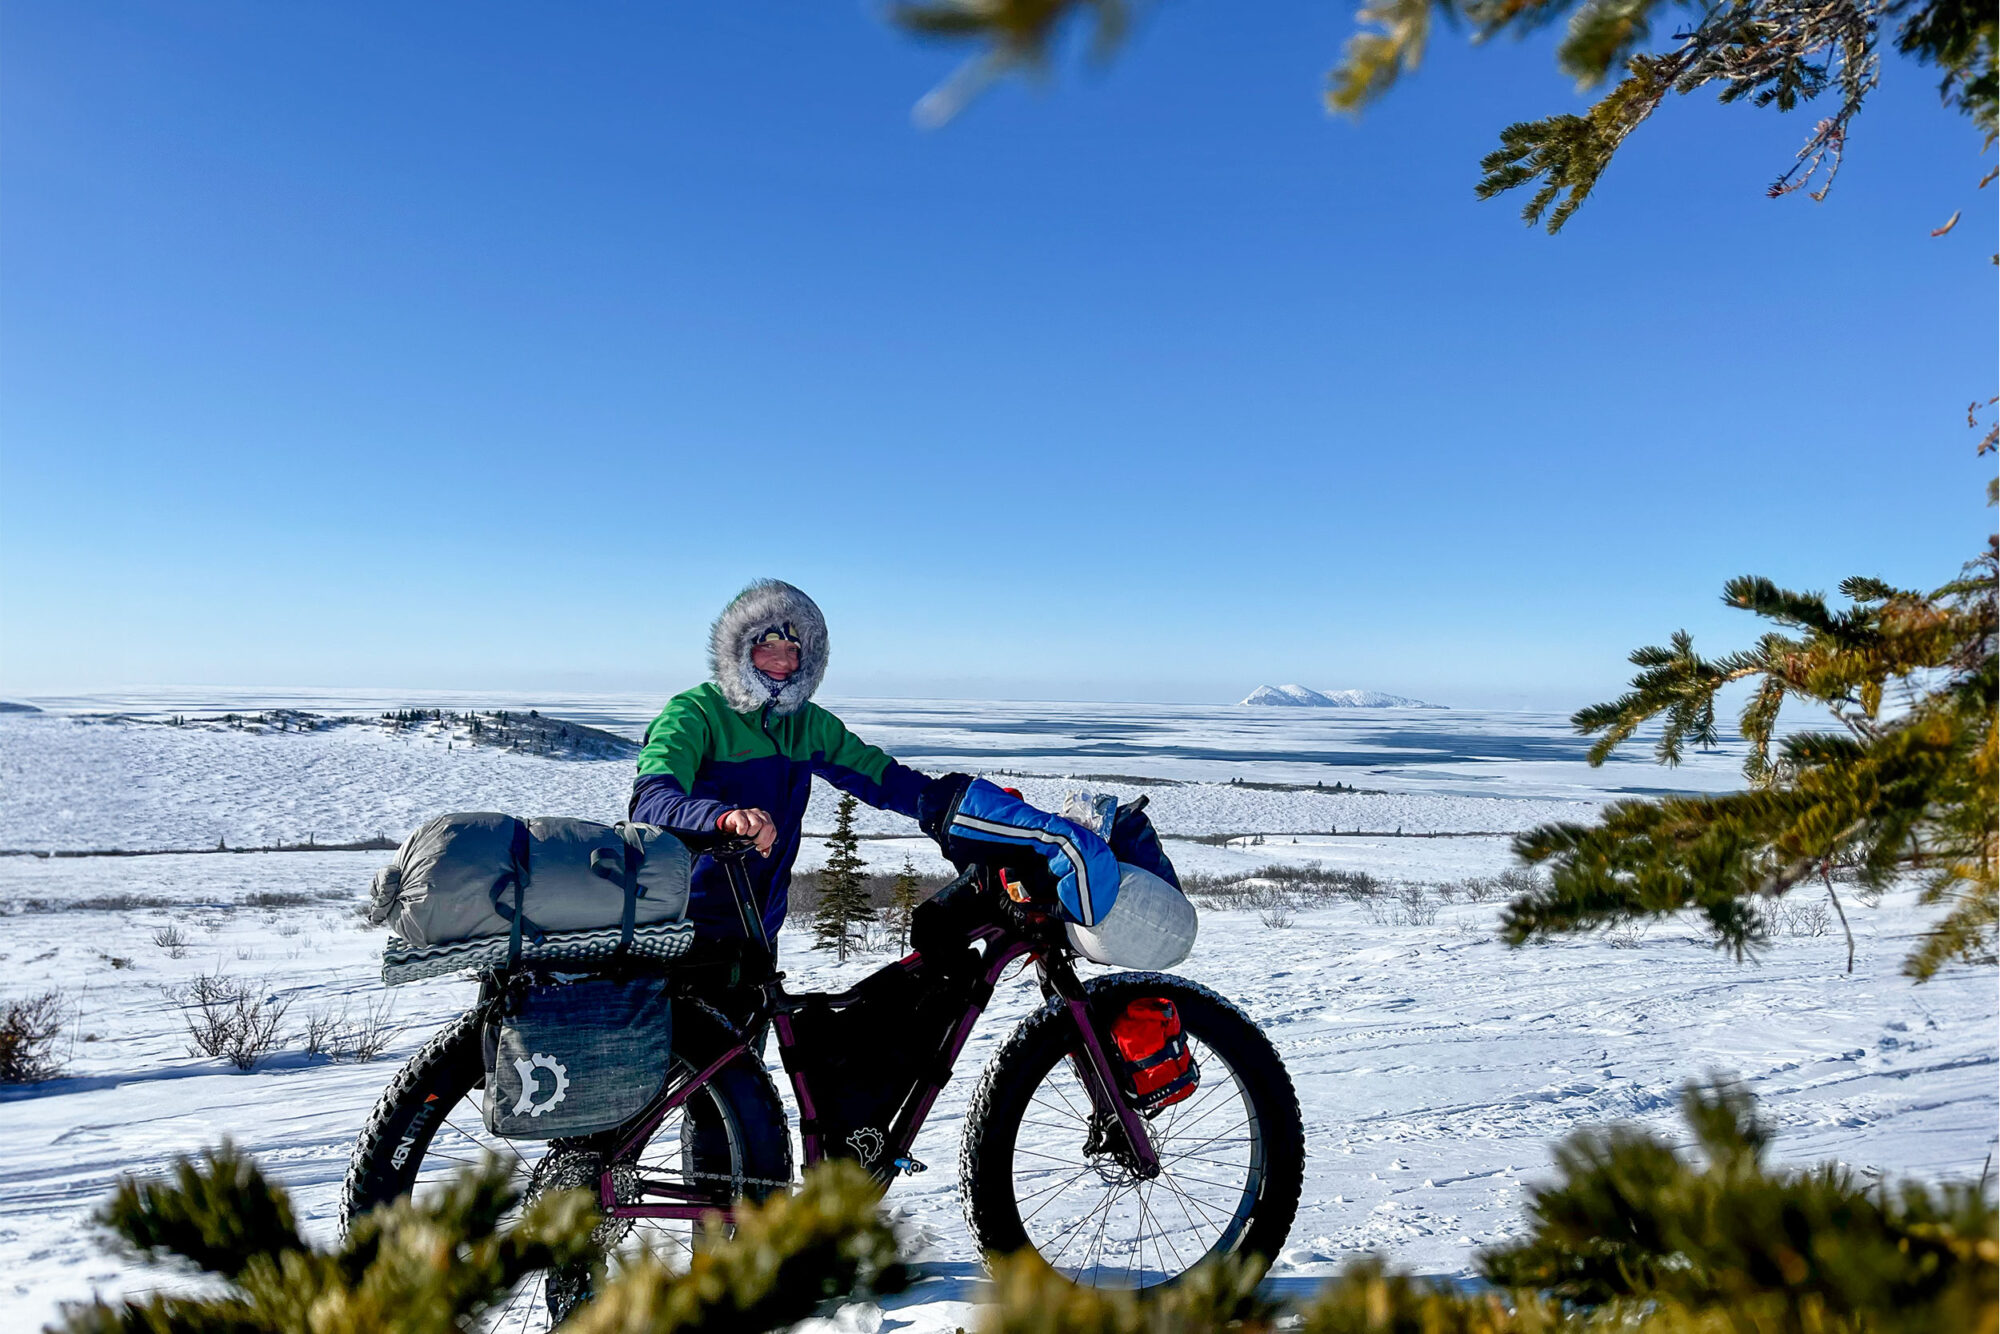 Alone time: ana jager’s solo ride on the iditarod trail